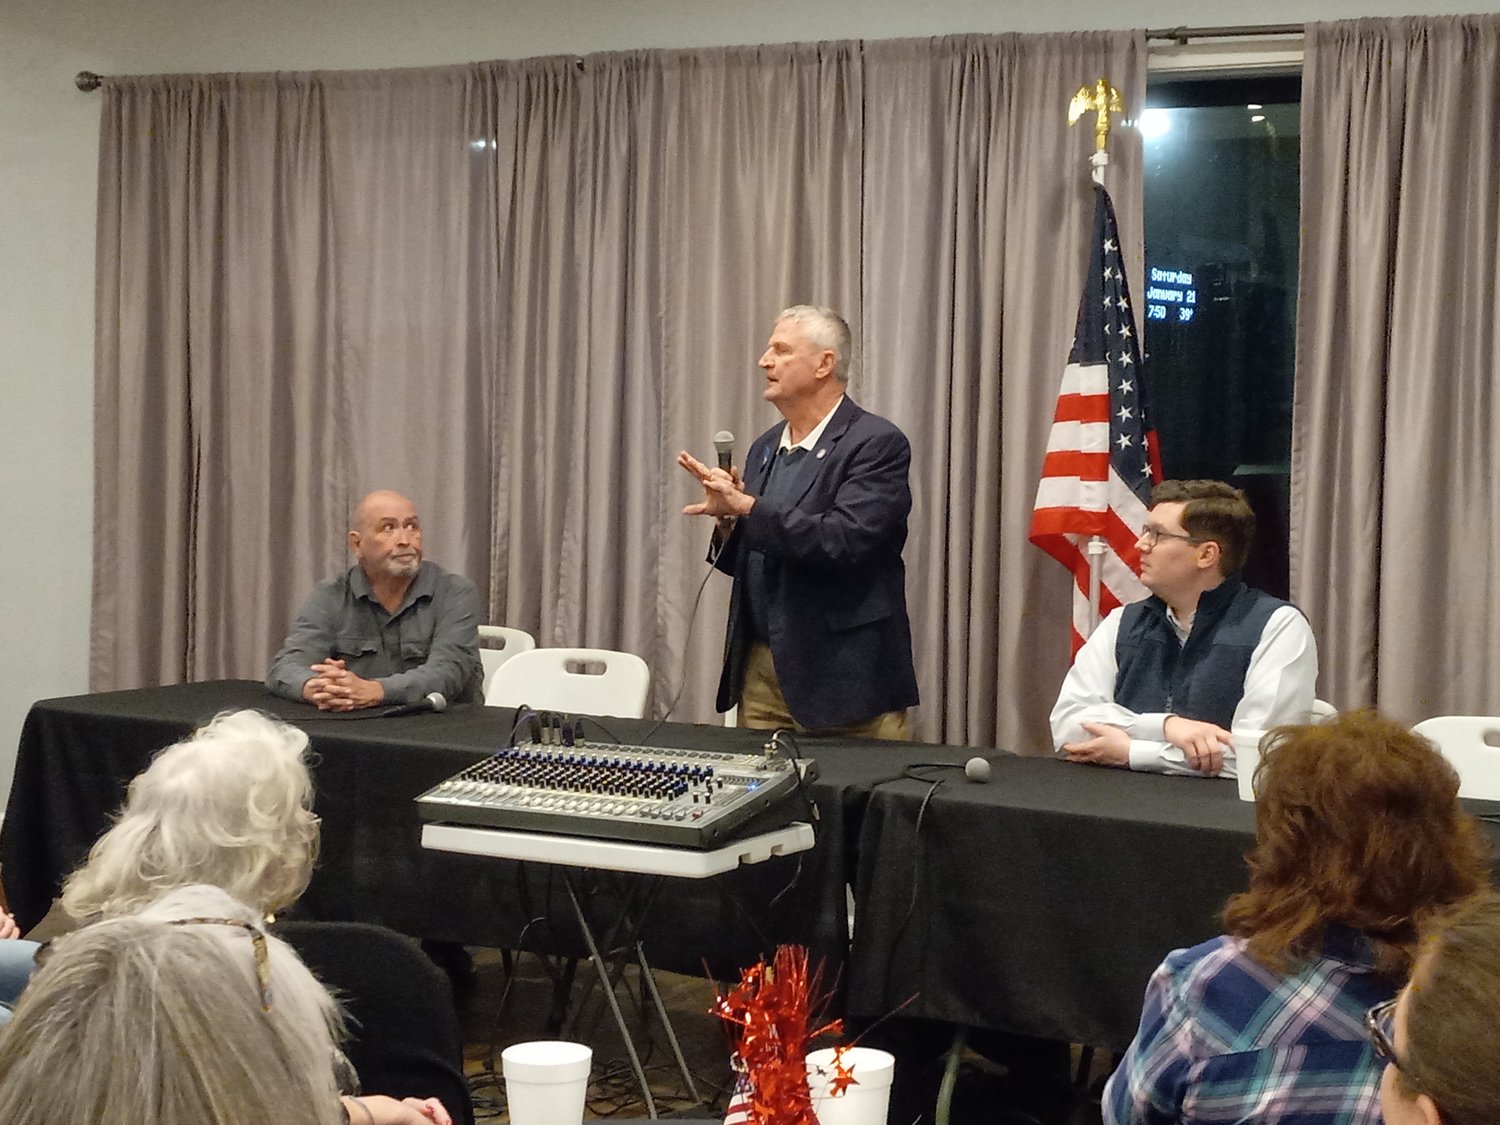 Rep. Chuck Smith, standing, speaks during a panel discussion alongside Rep. Ken Collins, left, and Congressman Jake LaTurner, right, at Saturday’s GOP event at Palluccas Event Hall.